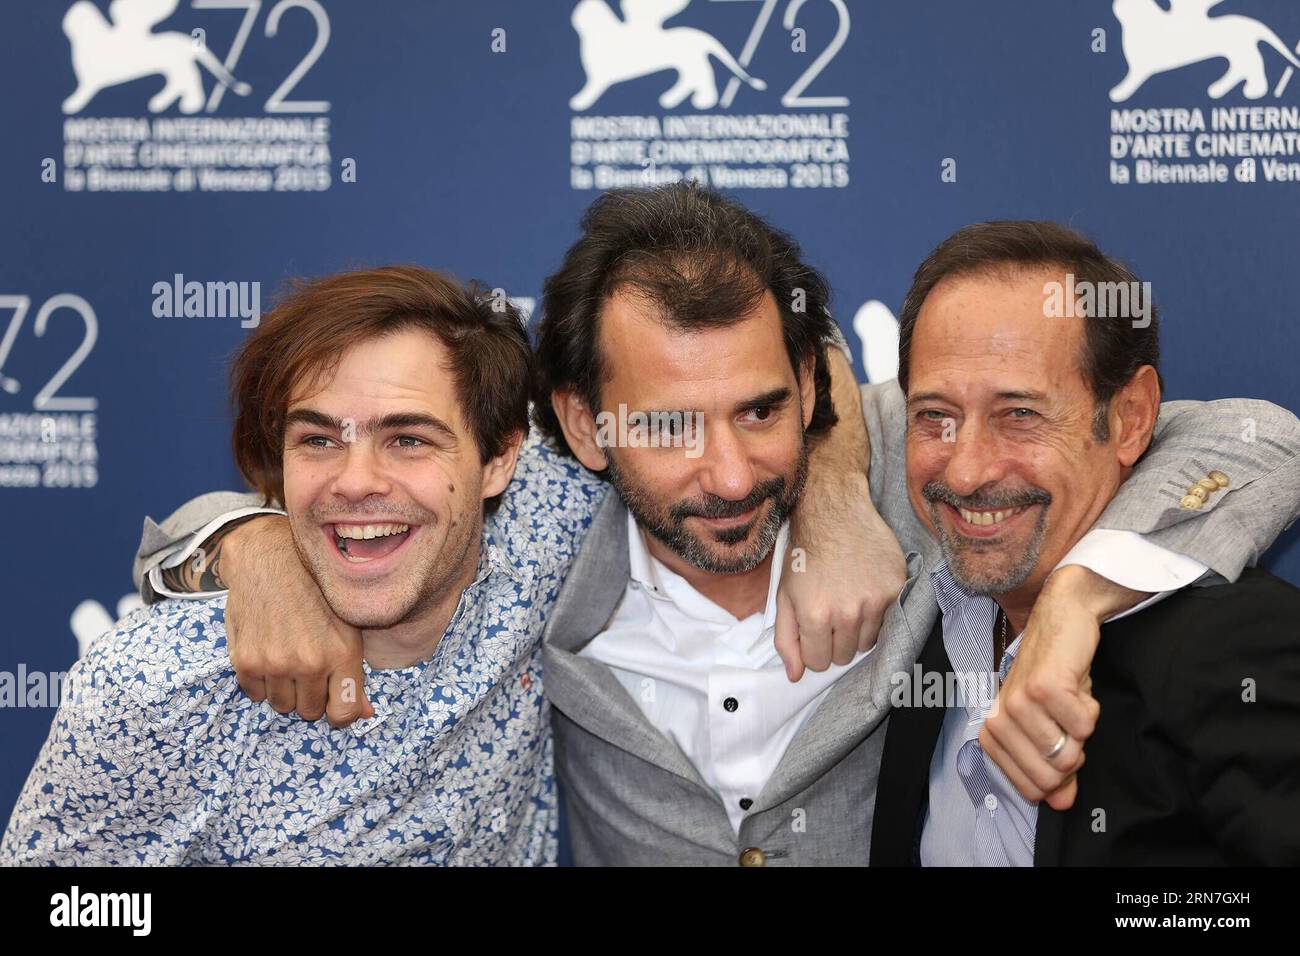 (150906) -- VENICE, Sept. 6, 2015 -- Actor Guillermo Francella (R), Peter Lanzani (L) and Director Pablo Trapero attend the El Clan (The Clan) photocall during the 72nd Venice Film Festival at Palazzo del Casino in Venice, Italy, on September 6, 2015.) ITALY-VENICE-FILM-FESTIVAL-72ND-EL CLAN-PHOTOCALL JinxYu PUBLICATIONxNOTxINxCHN   150906 Venice Sept 6 2015 Actor Guillermo Francella r Peter Lanzani l and Director Pablo Trapero attend The El Clan The Clan photo call during The 72nd Venice Film Festival AT Palazzo Del Casino in Venice Italy ON September 6 2015 Italy Venice Film Festival 72nd El Stock Photo